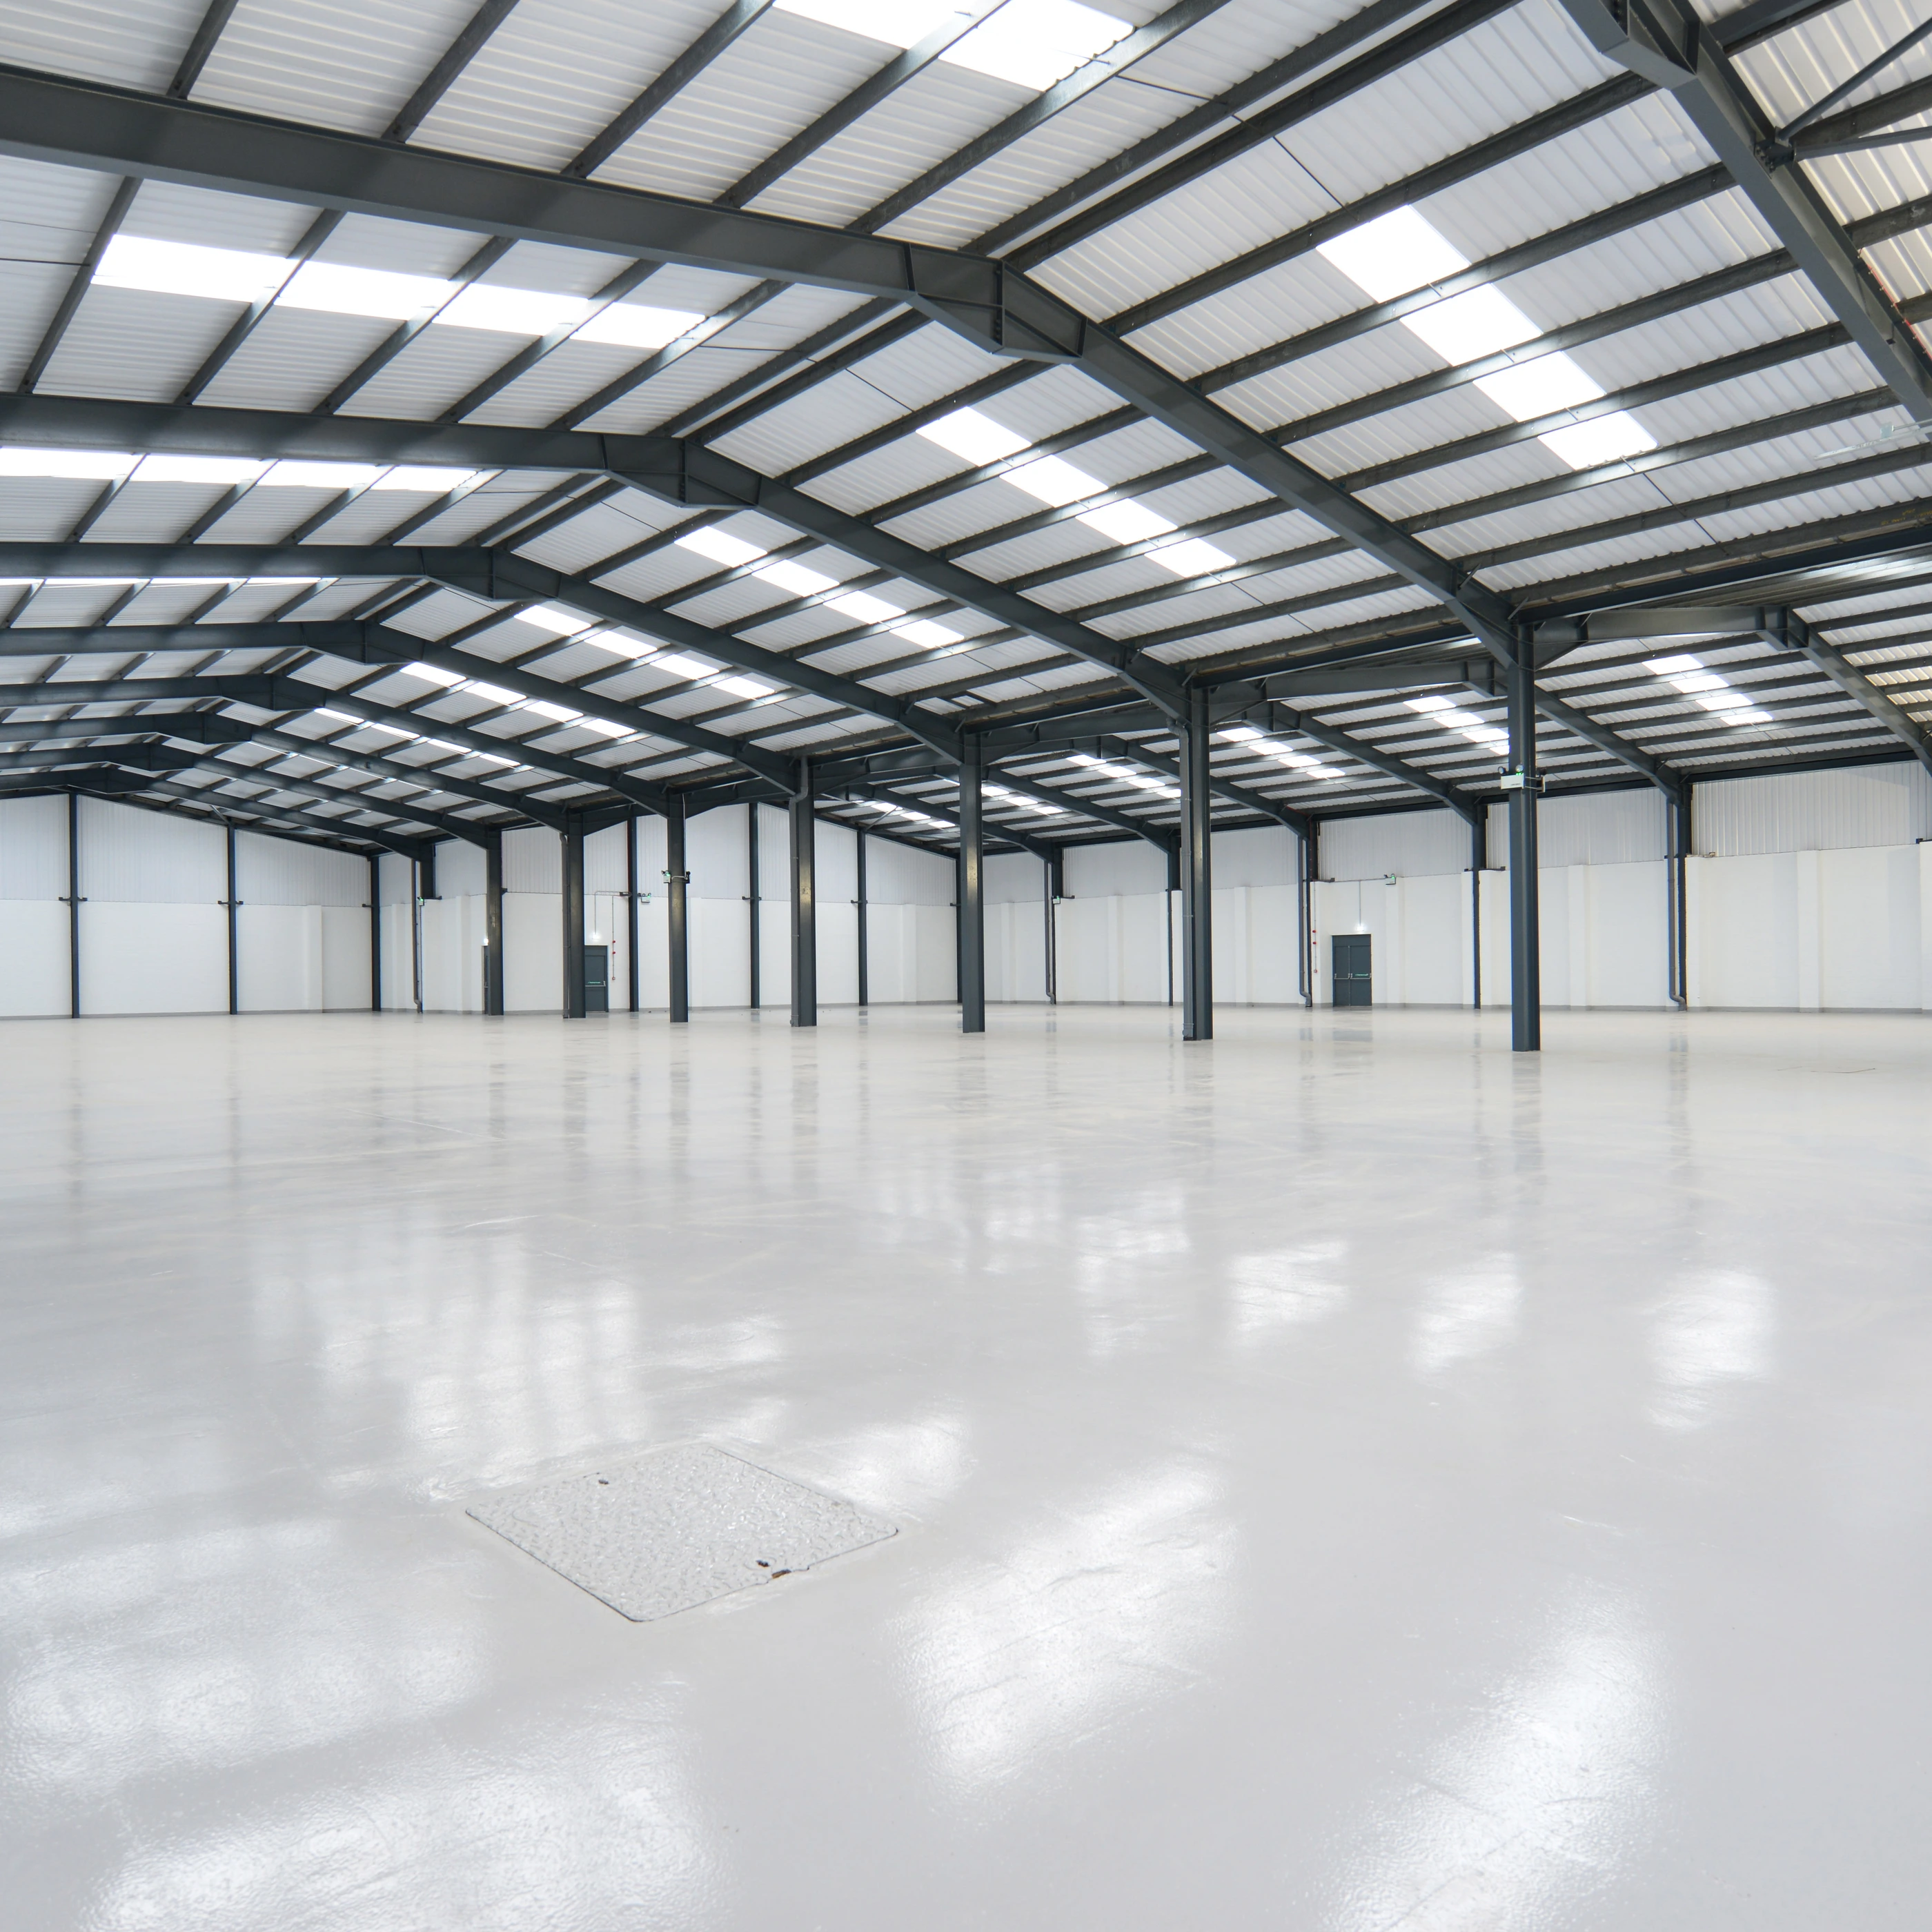 View of a large empty warehouse unit